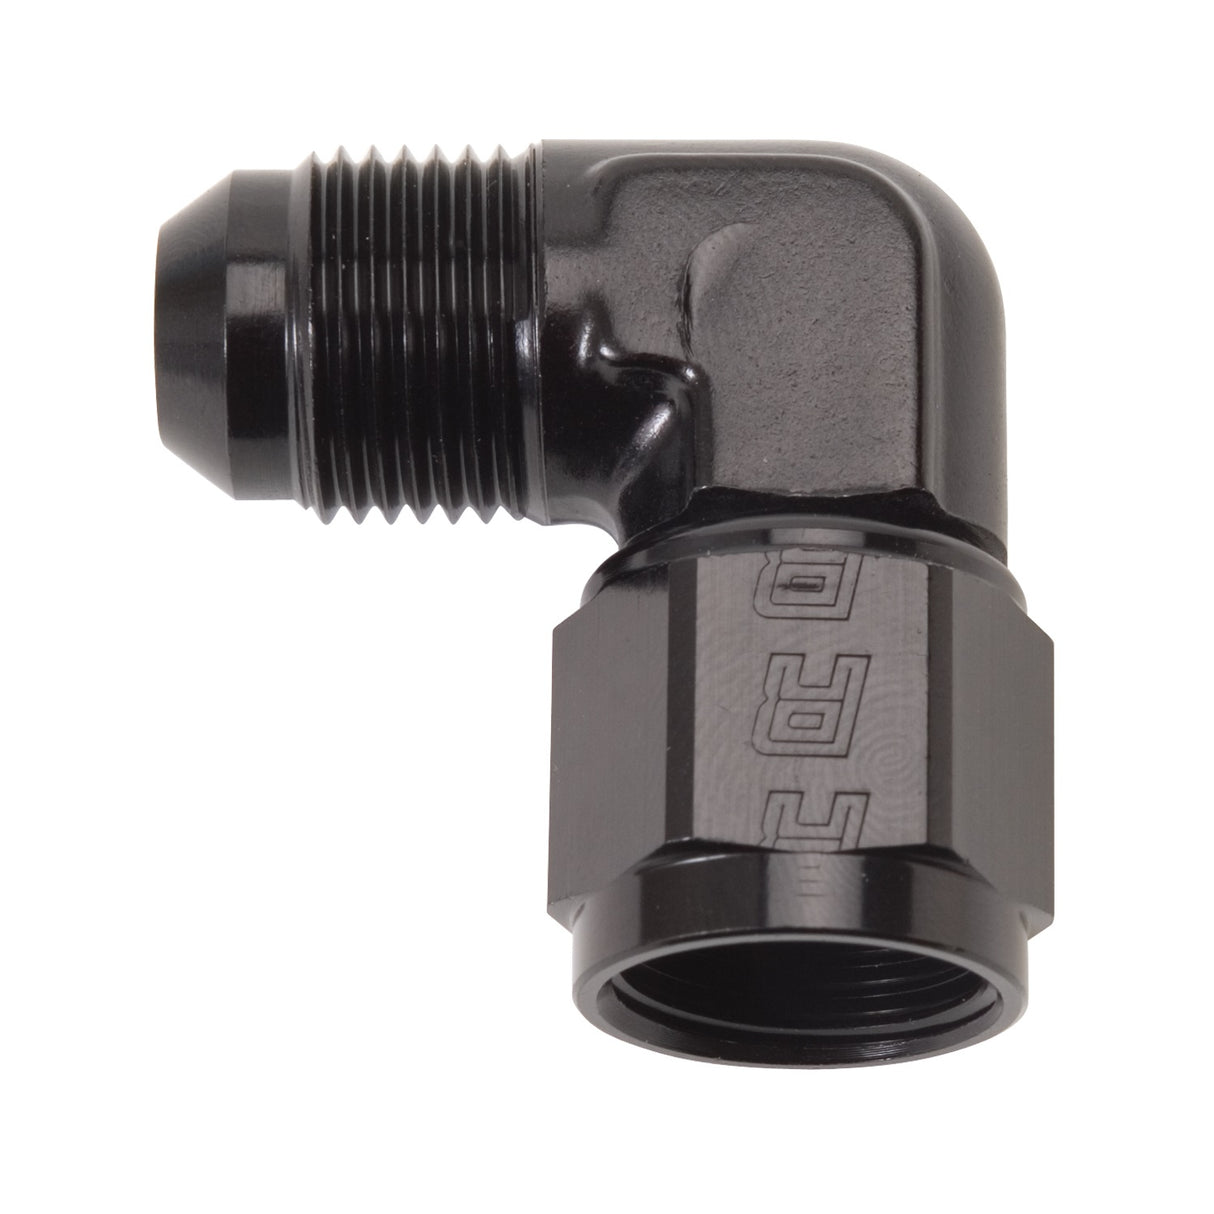 614807 | ADAPTER FITTING #8 AN FEMALE SWIVEL TO #8 AN MALE 90 DEG ELBOW BLK ANODIZED